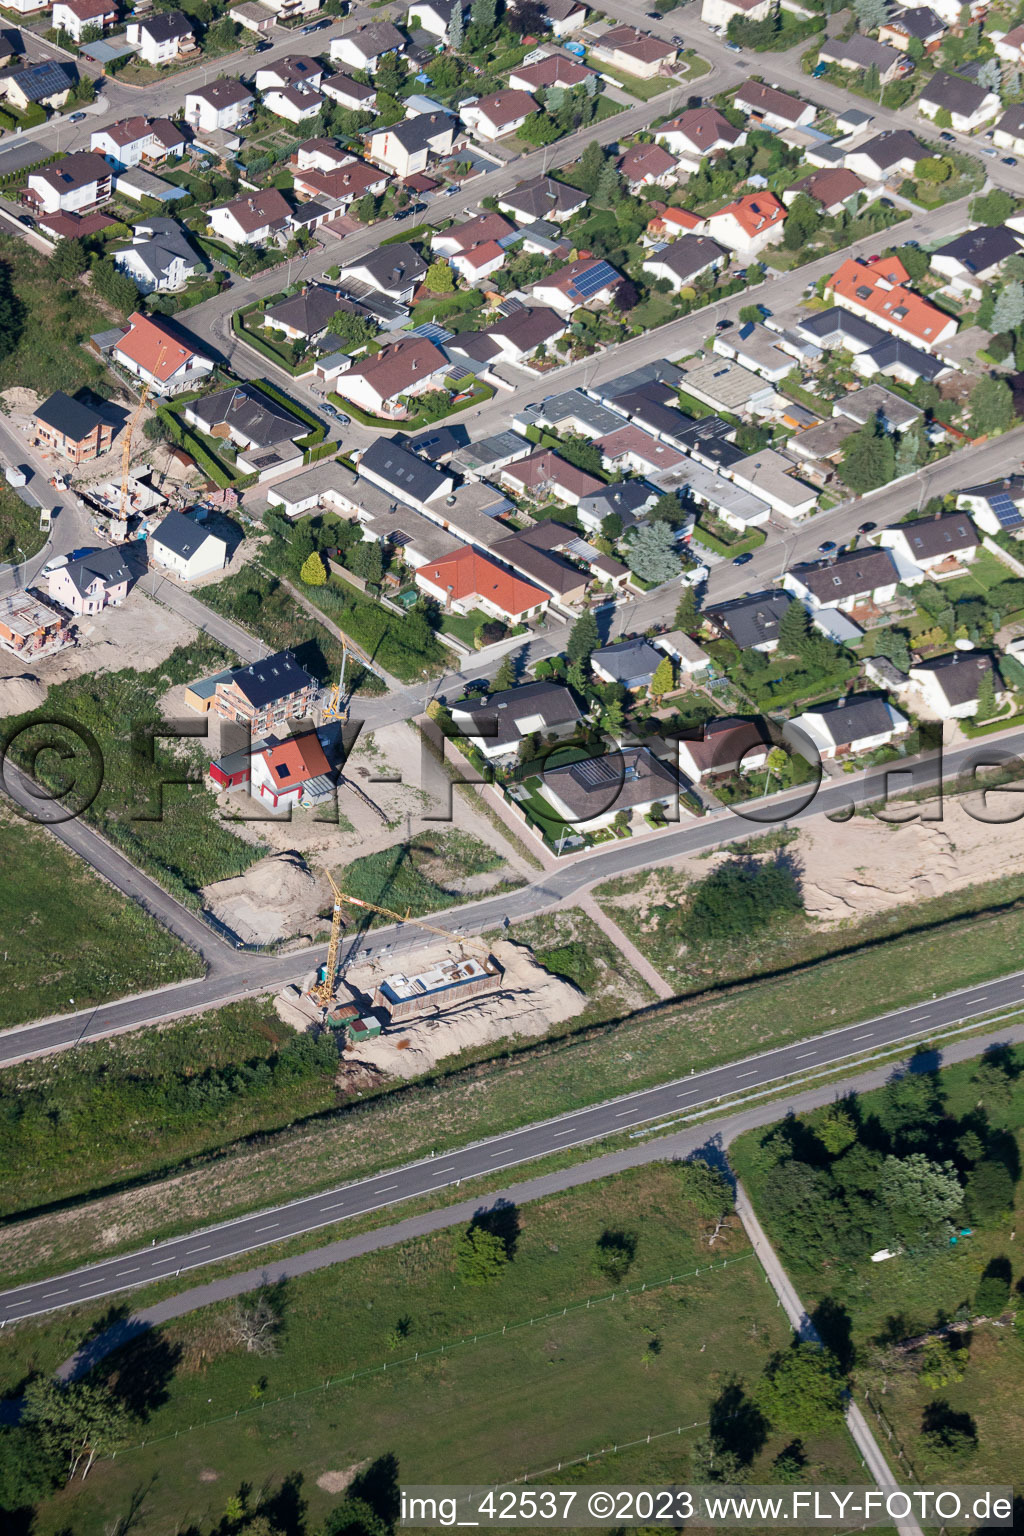 New development area west in Jockgrim in the state Rhineland-Palatinate, Germany seen from above